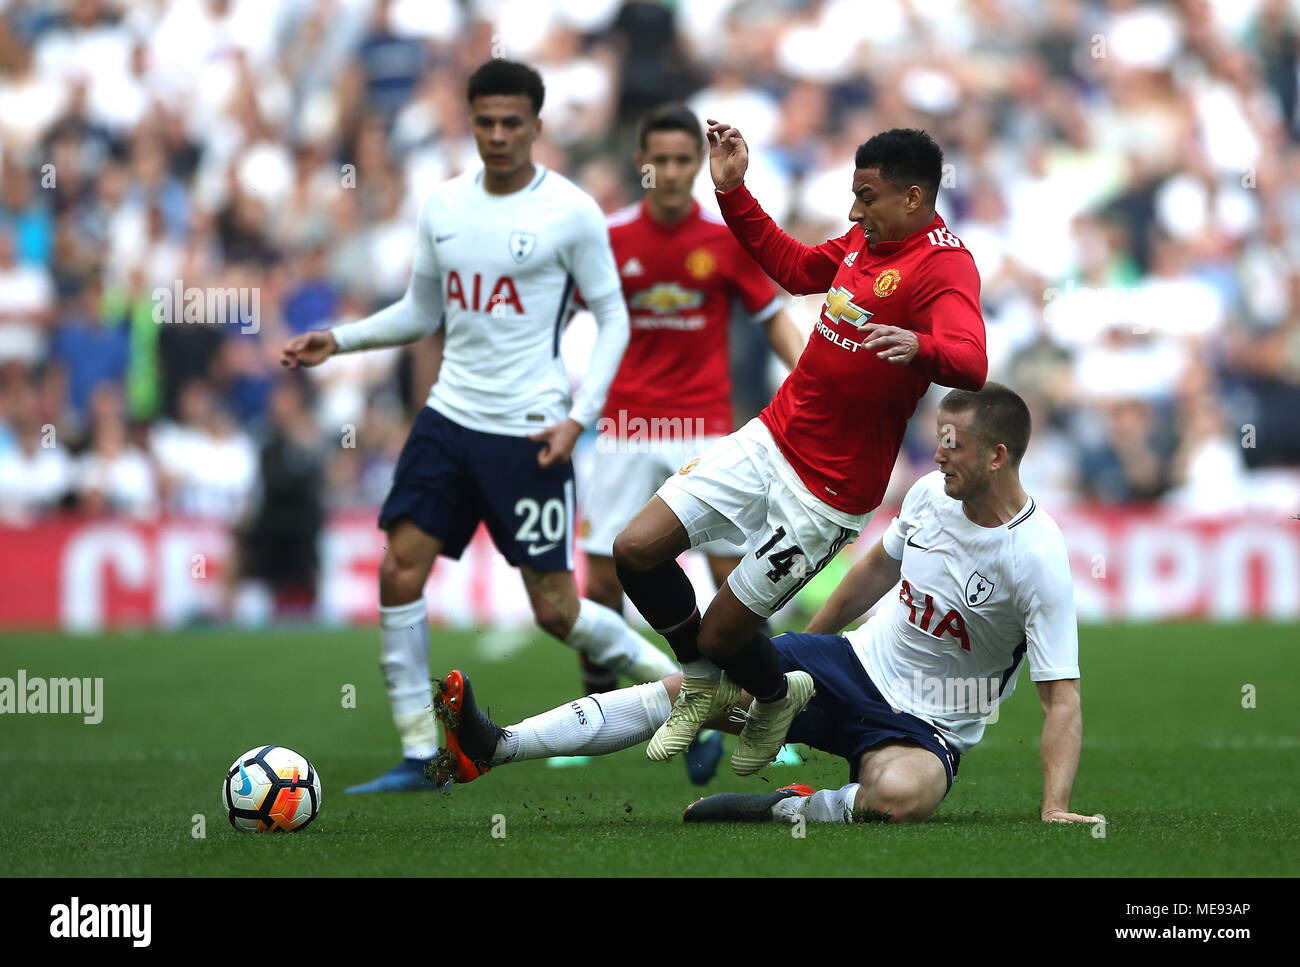 Manchester Uniteds Jesse Lingard (second right) battle for the ball with Tottenham Hotspurs Eric Dier (right) during the Emirates FA Cup semi-final match at Wembley Stadium, London